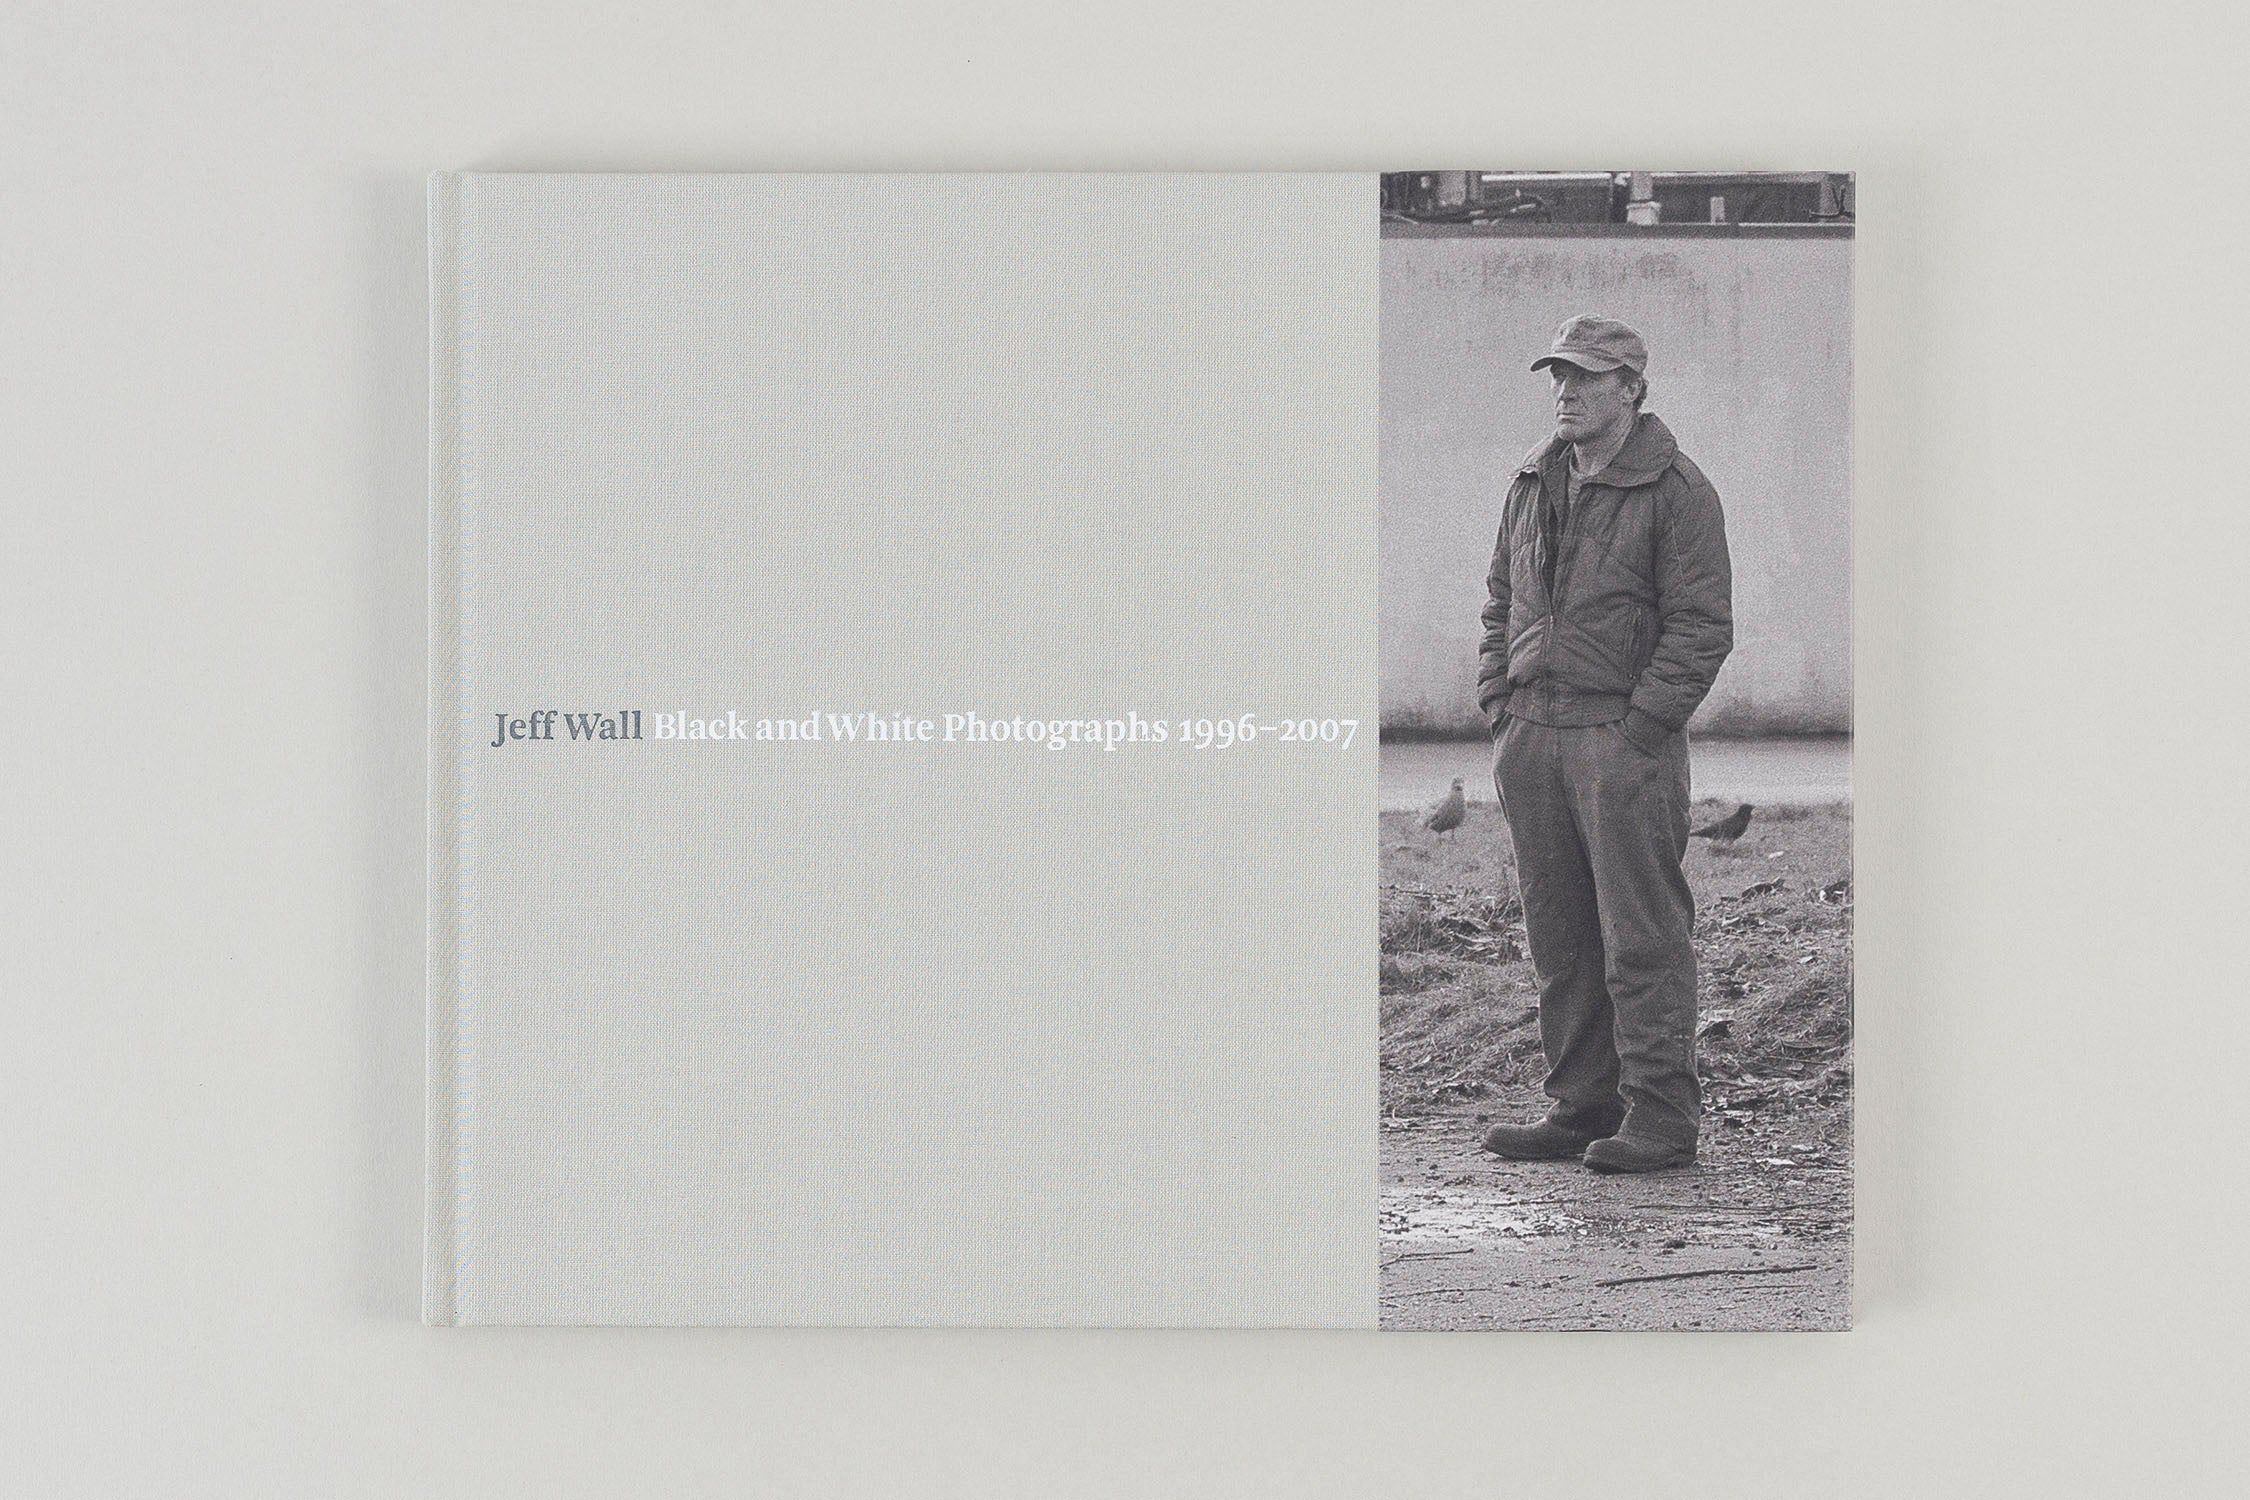 Jeff Wall ‘Black and White Photographs 1996-2007’ (2007)